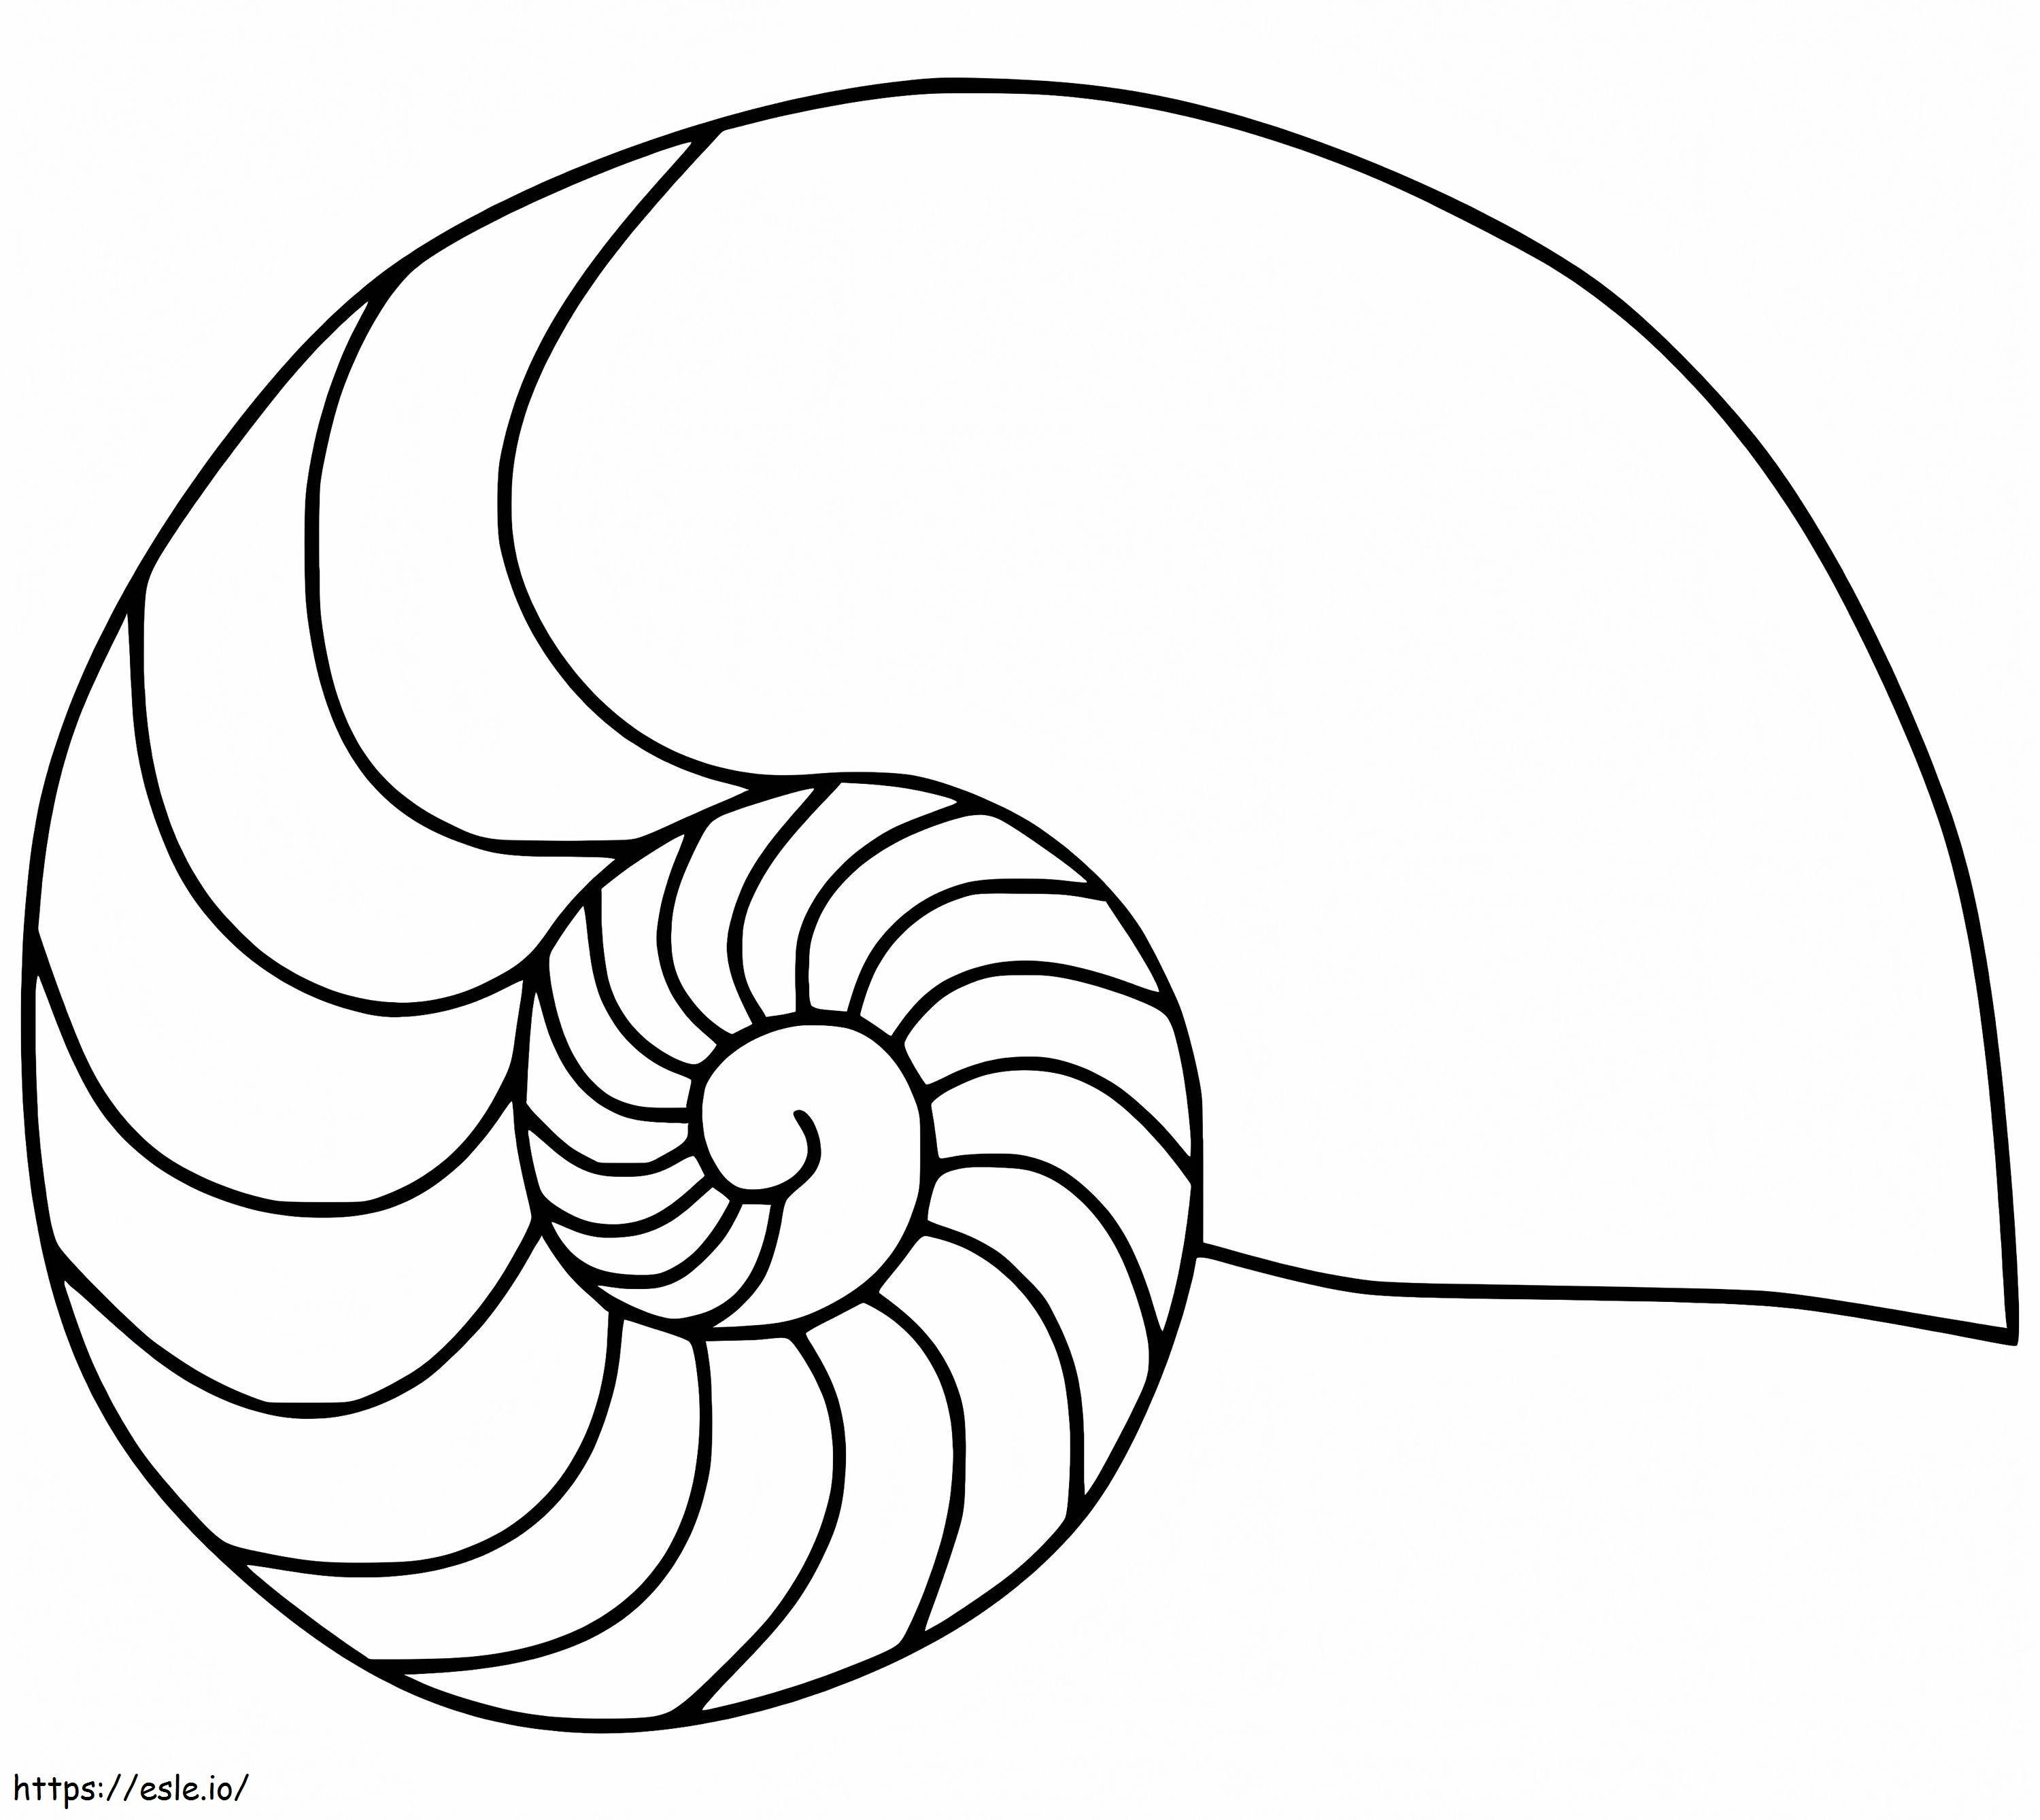 Nautilus Shell 3 coloring page